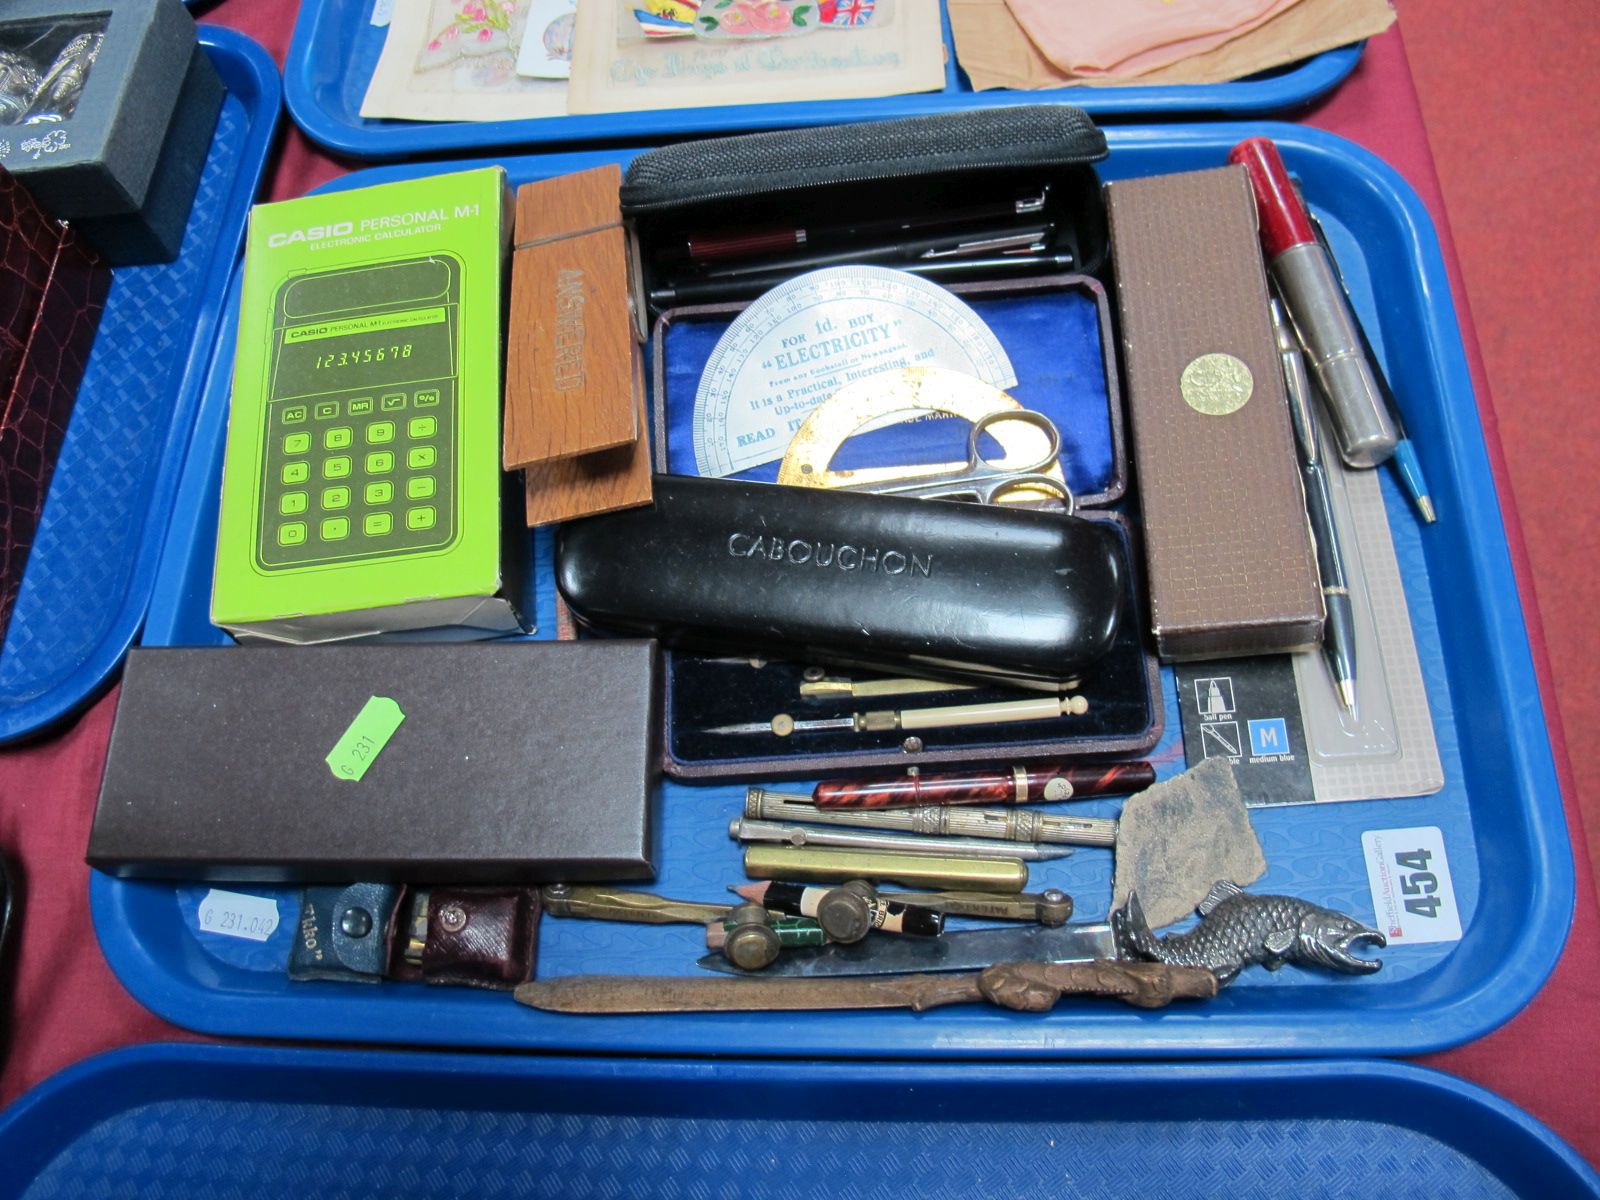 Plated Paper Knife, having fish handle, pencil sharpener, geometry set, Casio calculator, Parker and